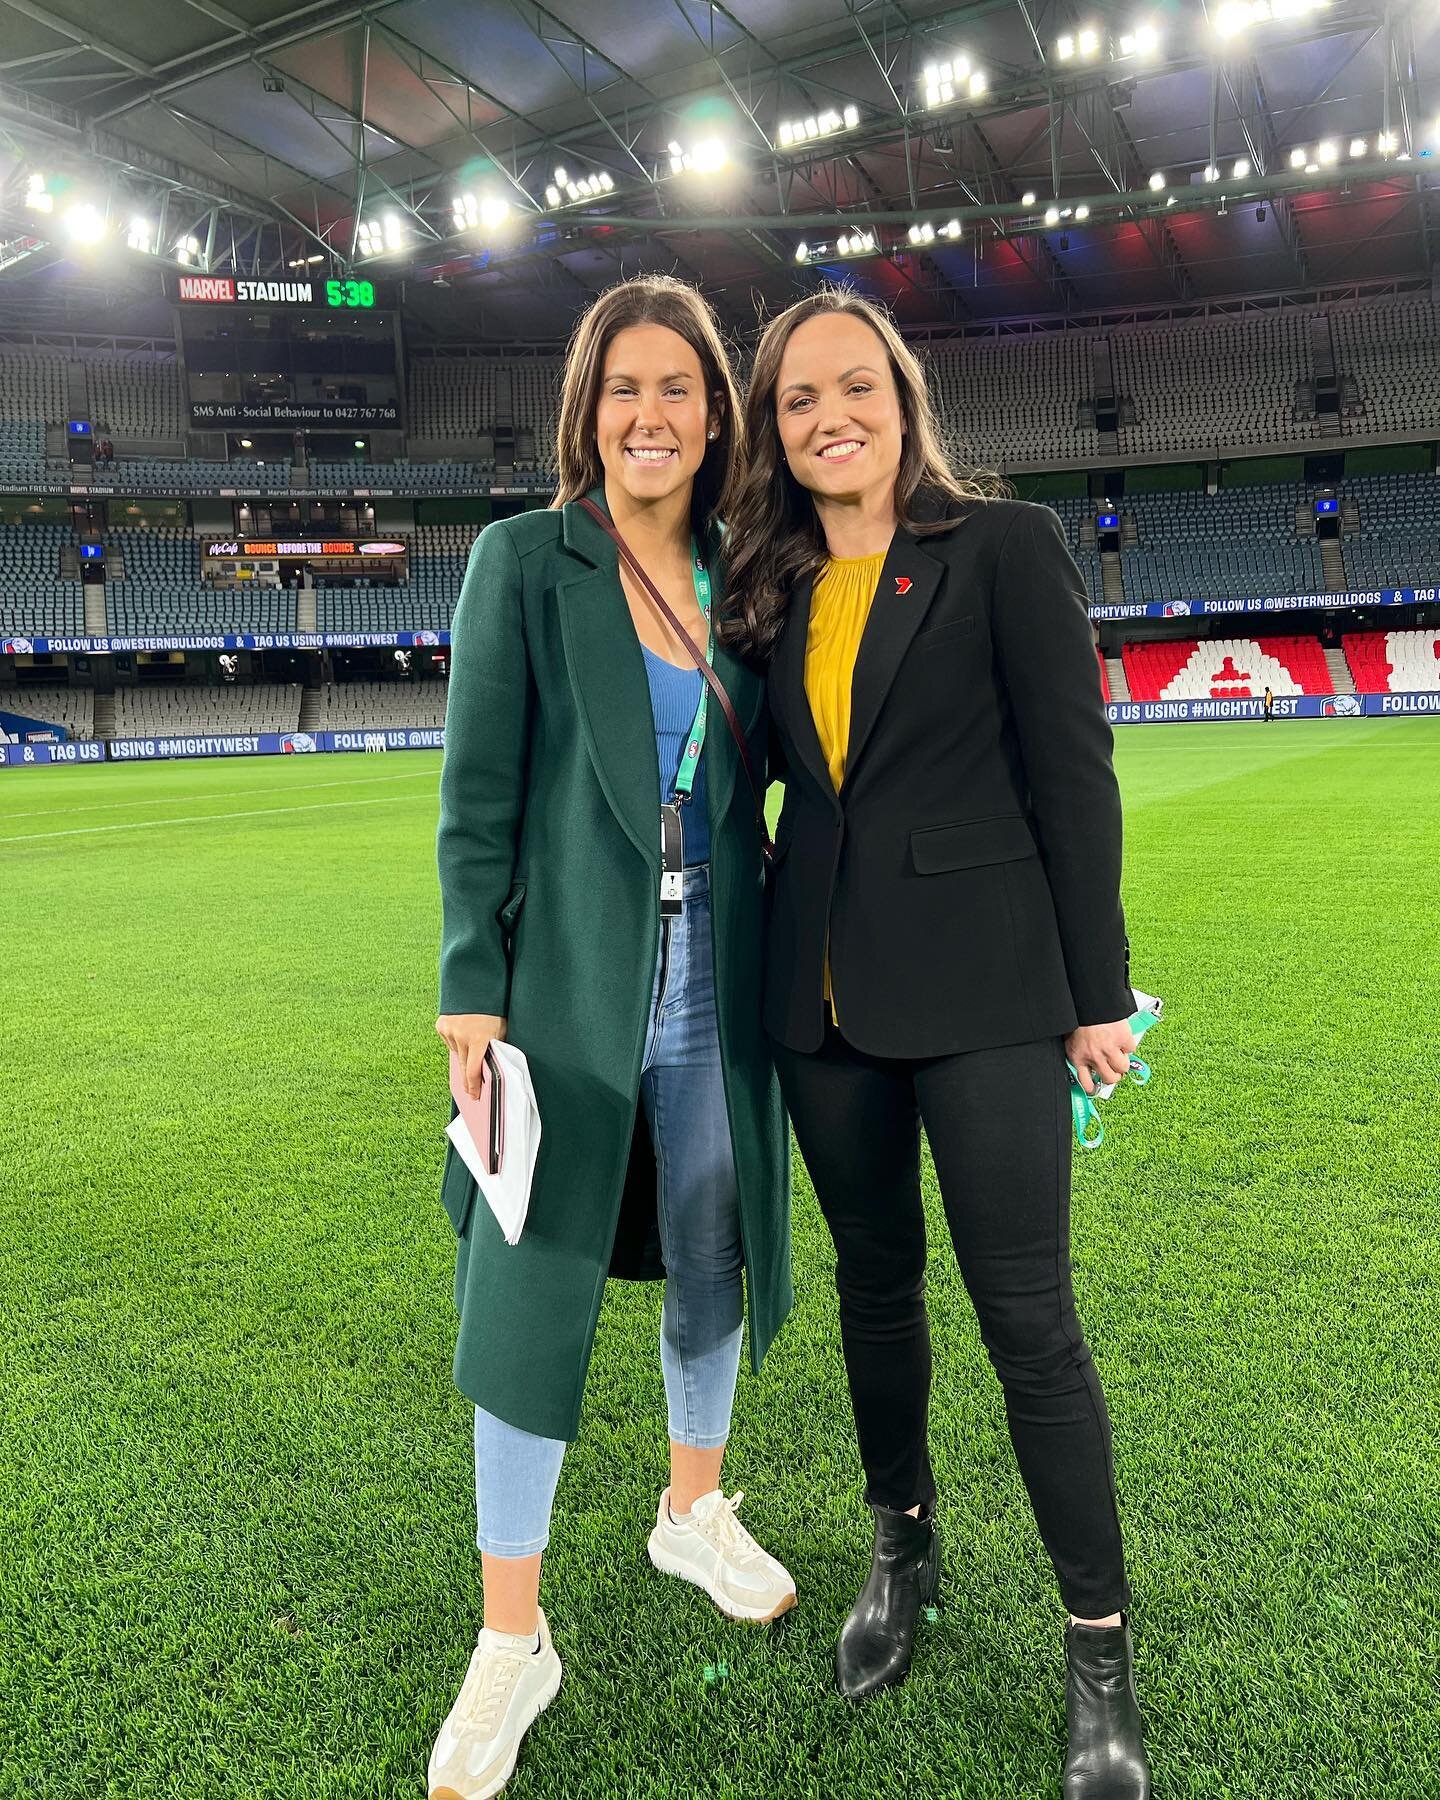 Learning from the best in the biz 🎙 
@daisypearce6 ❤️
Great to be able to follow the @7afl crew around for tonight&rsquo;s big match! #saintsvsdogs